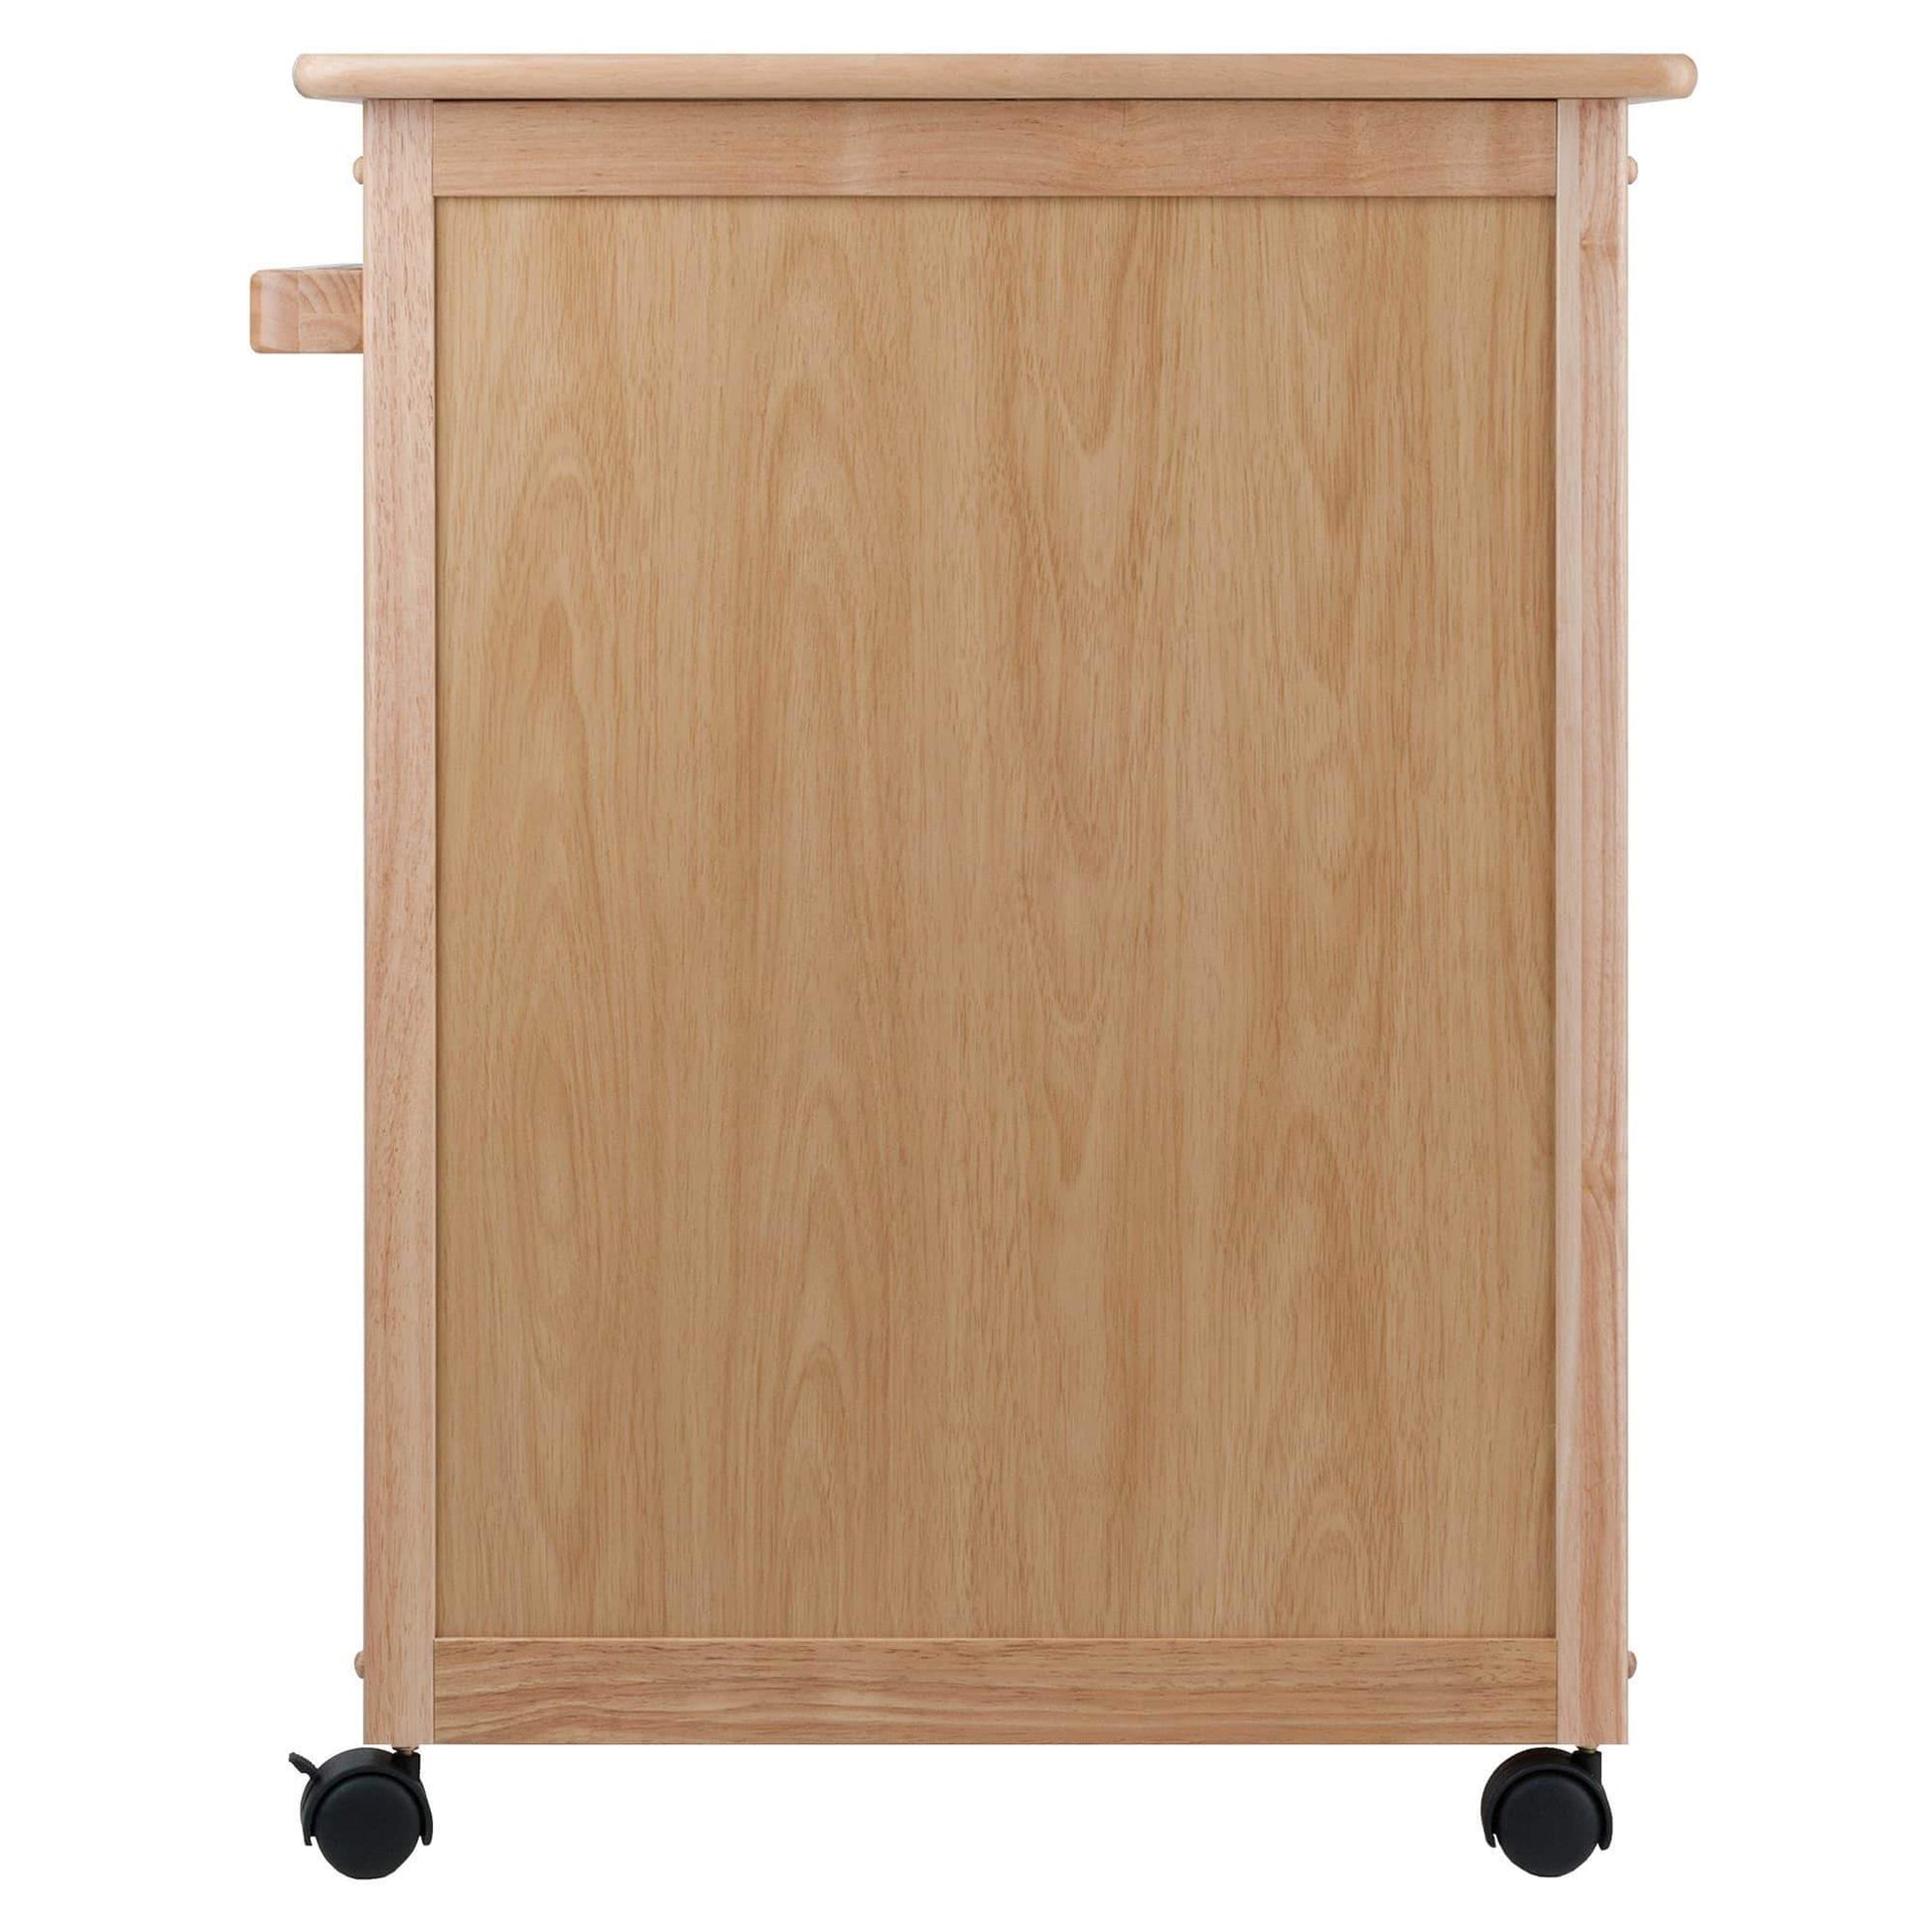 Budget friendly winsome wood single drawer kitchen cabinet storage cart natural